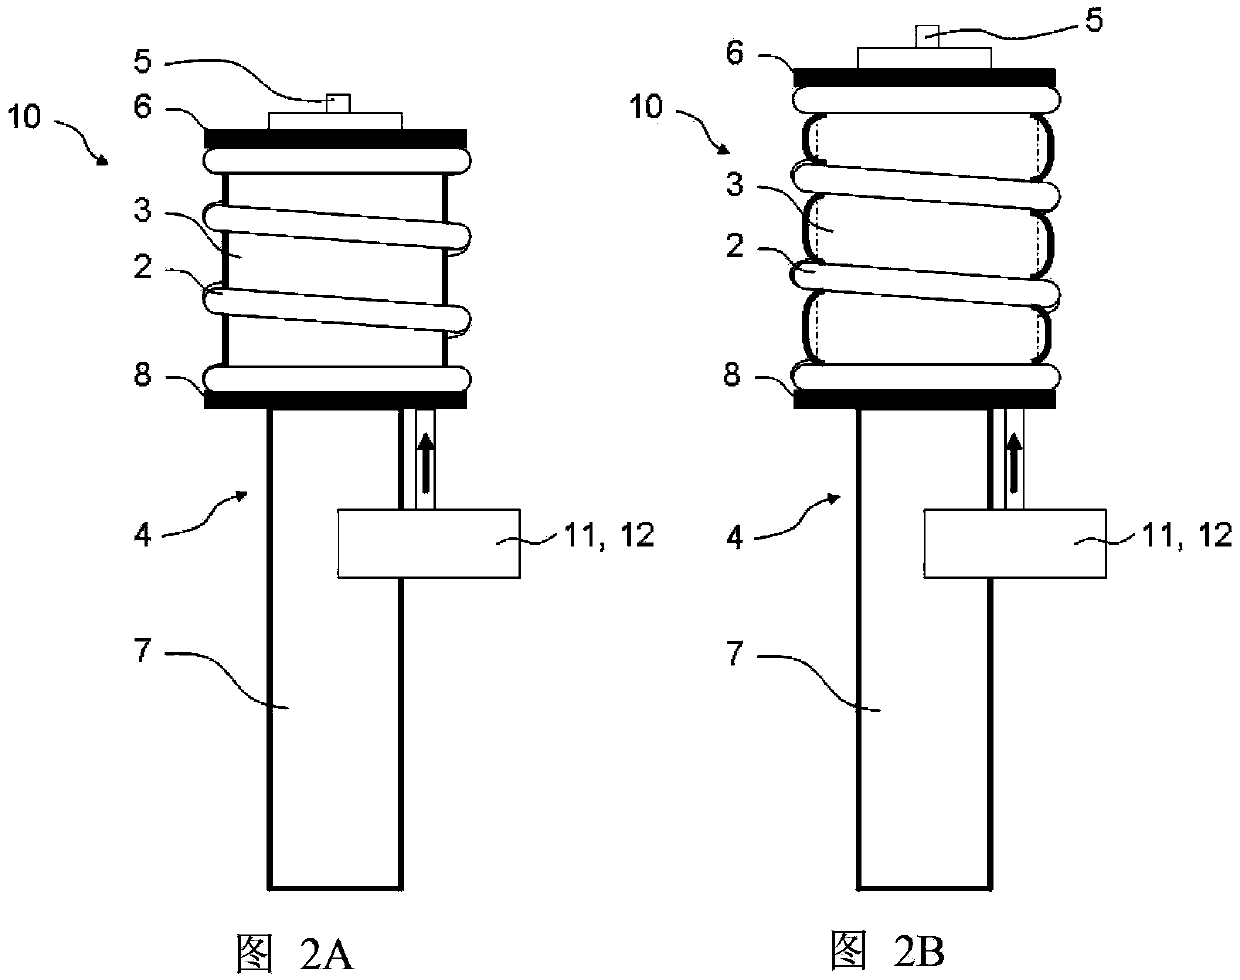 Height adjusting device for automobile body